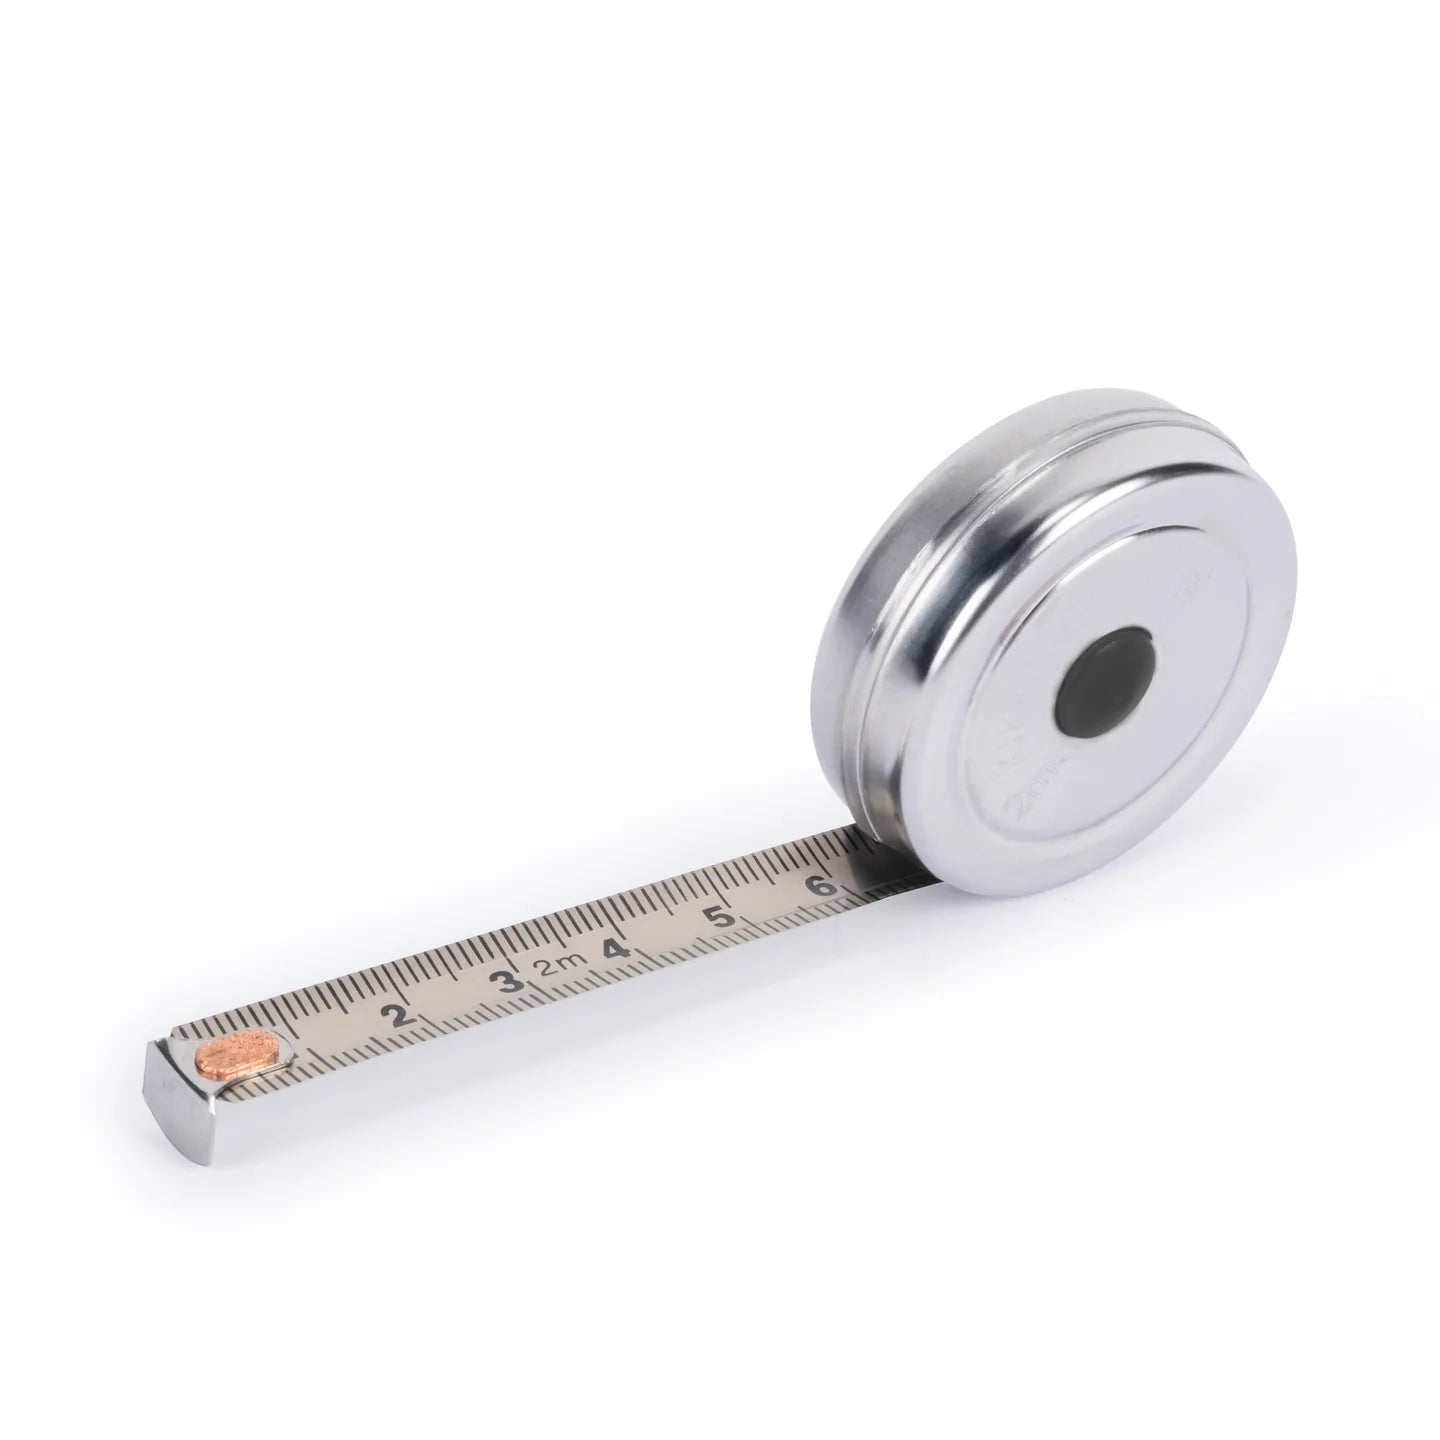 Fab Gifts | Kikkerland Mini Tape Measure by Weirs of Baggot Street